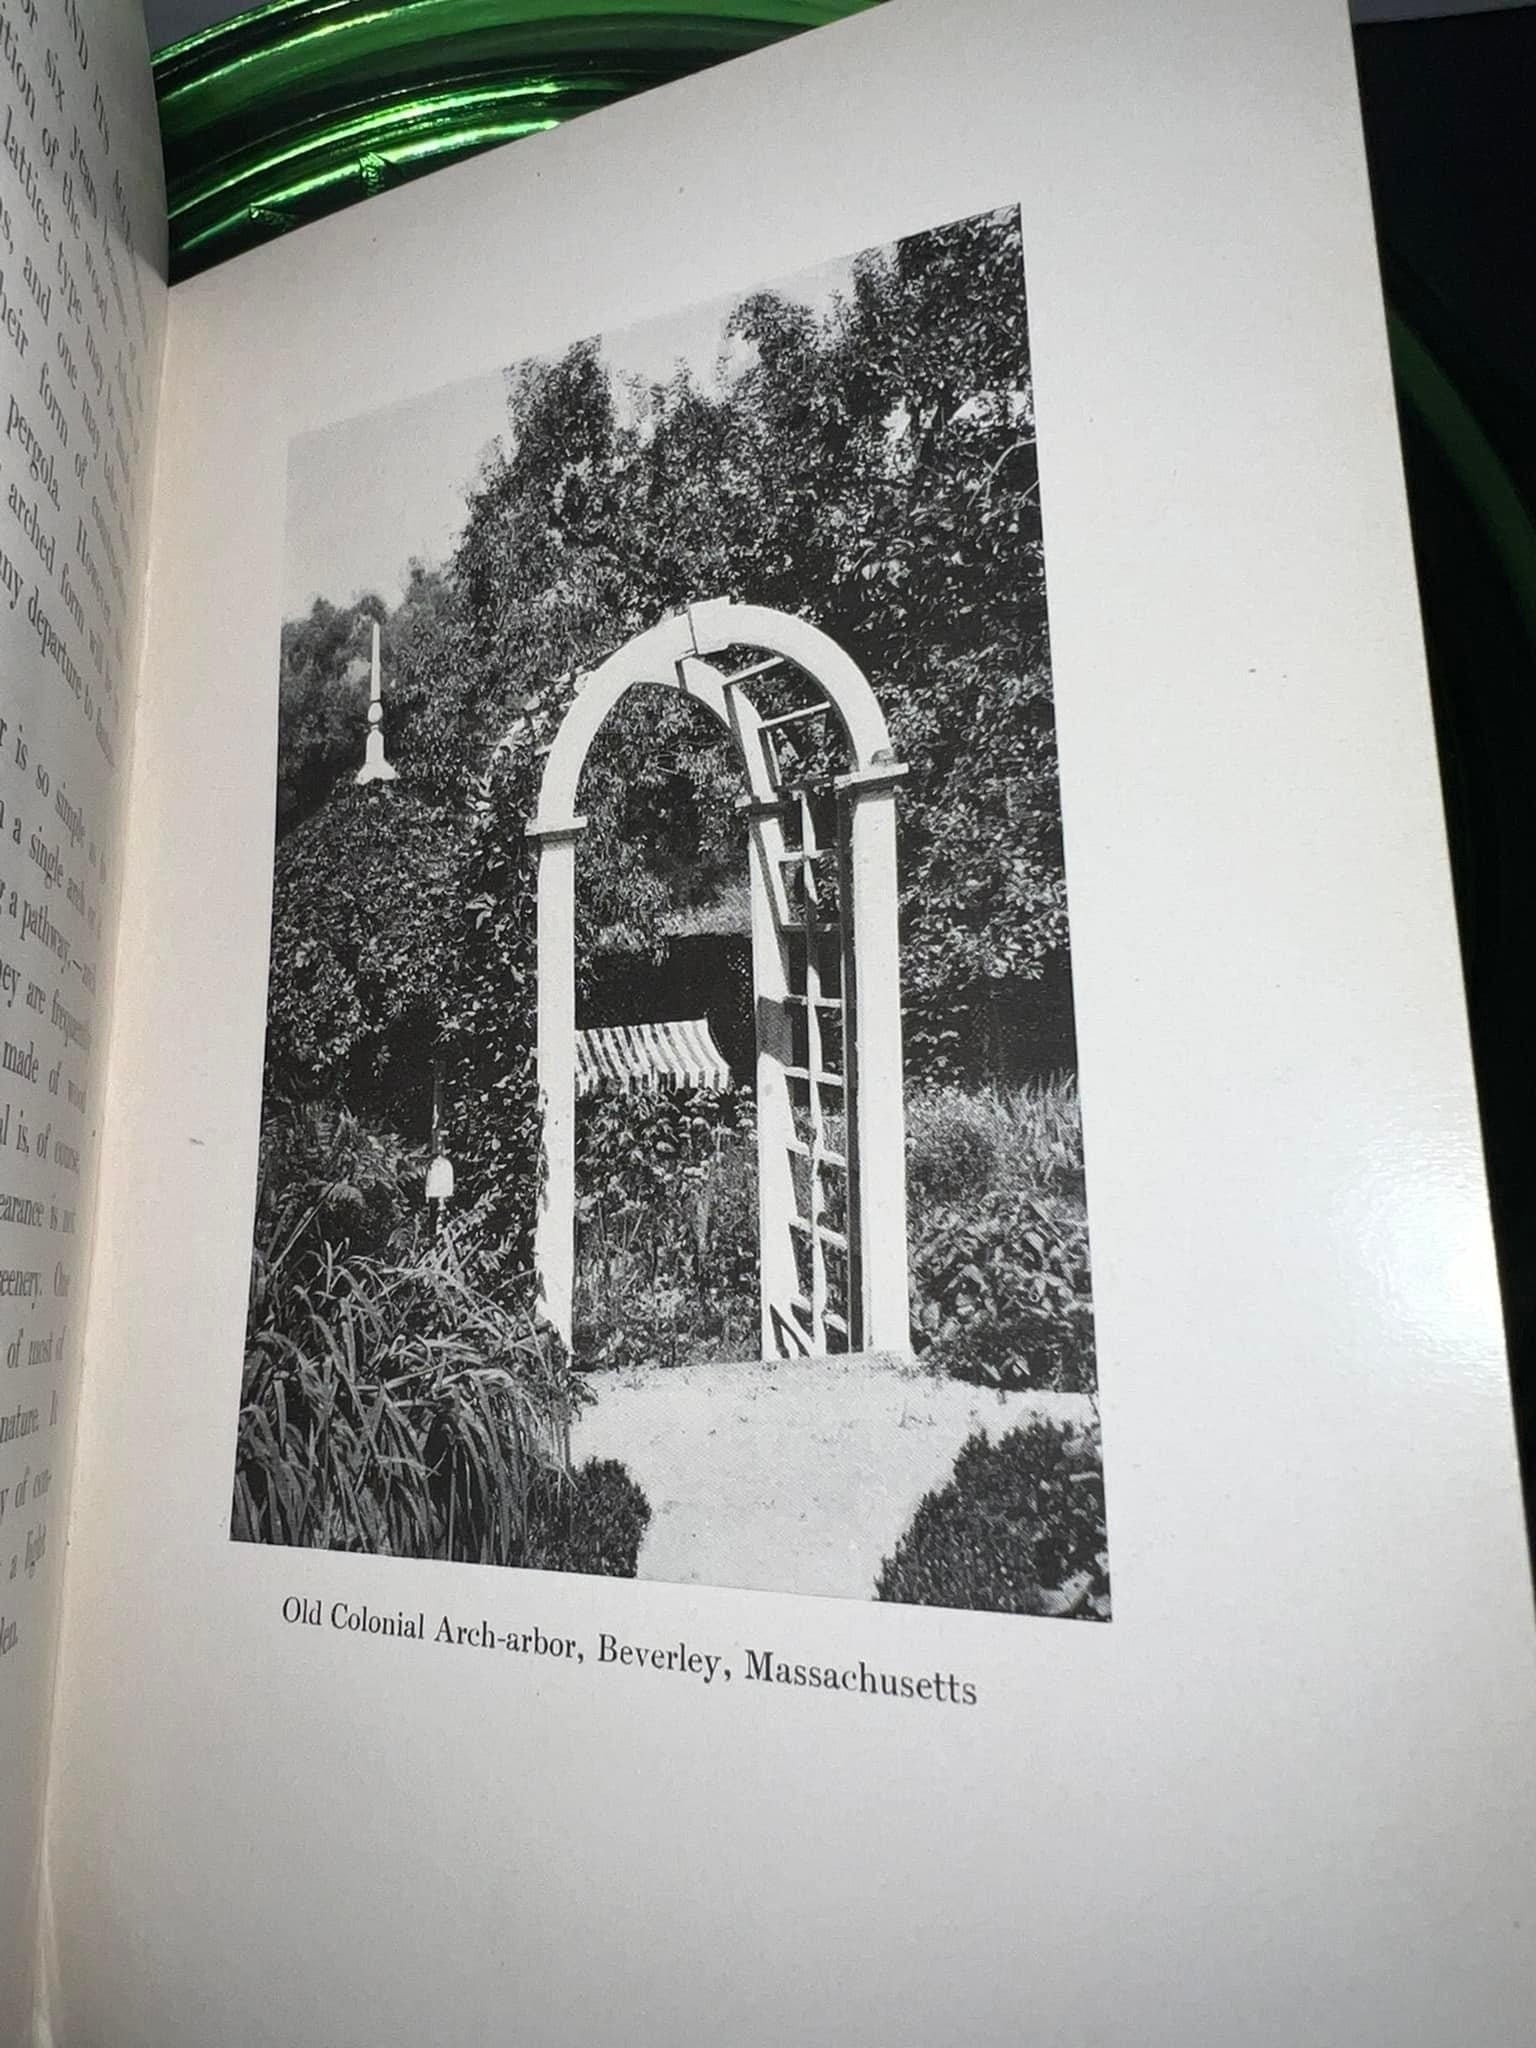 Antique 1907 The garden and its accessories profusely illustrated horticultural